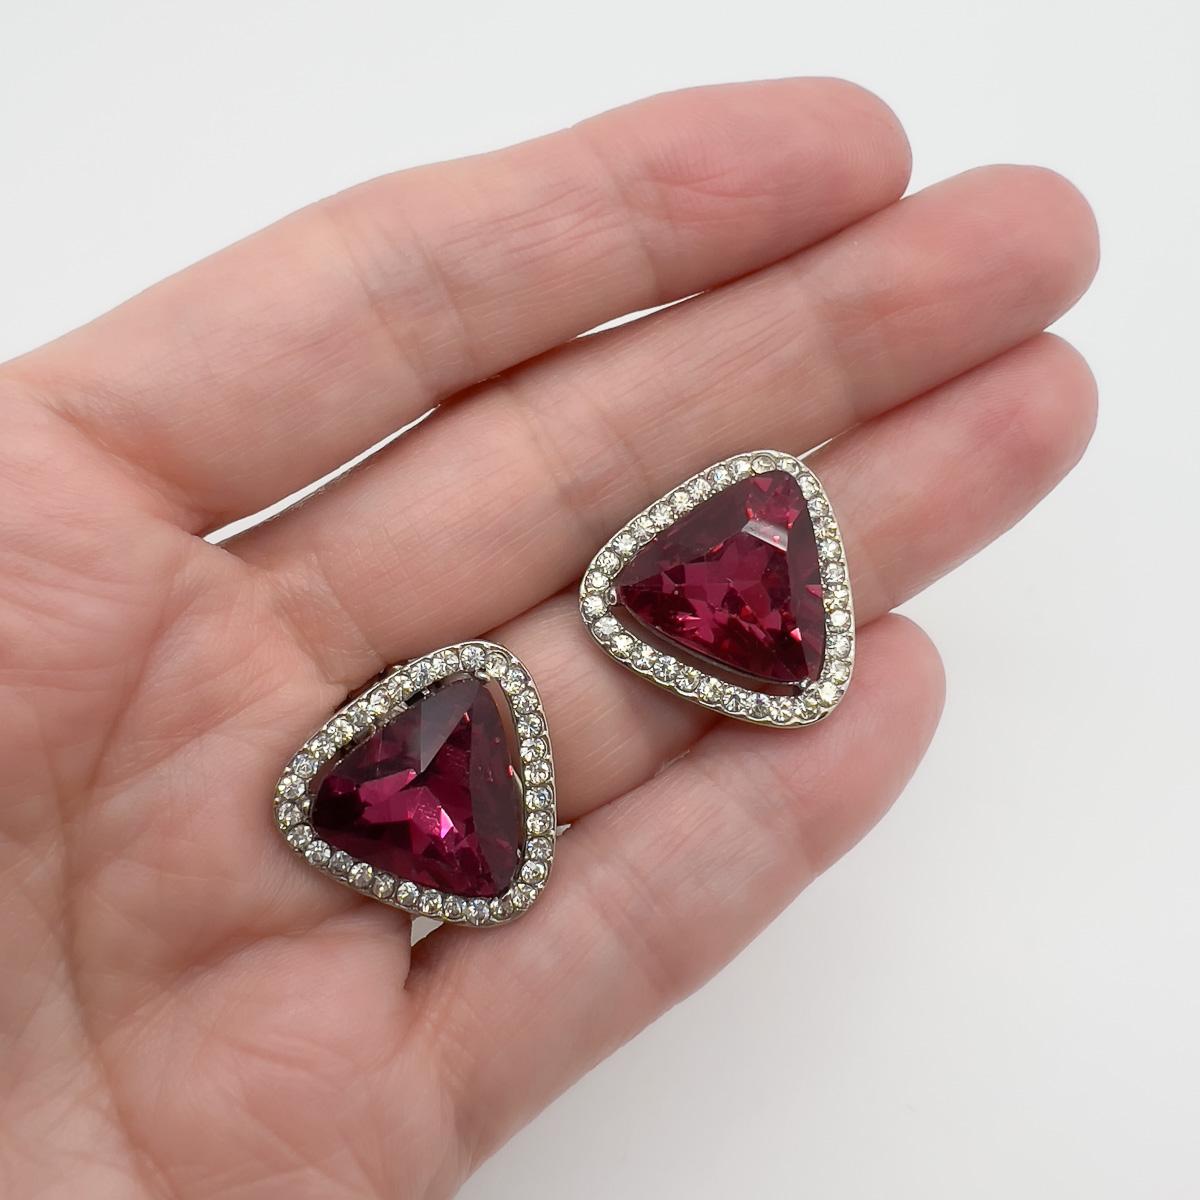 Vintage Pink Trillion Crystal Earrings 1970s In Good Condition For Sale In Wilmslow, GB